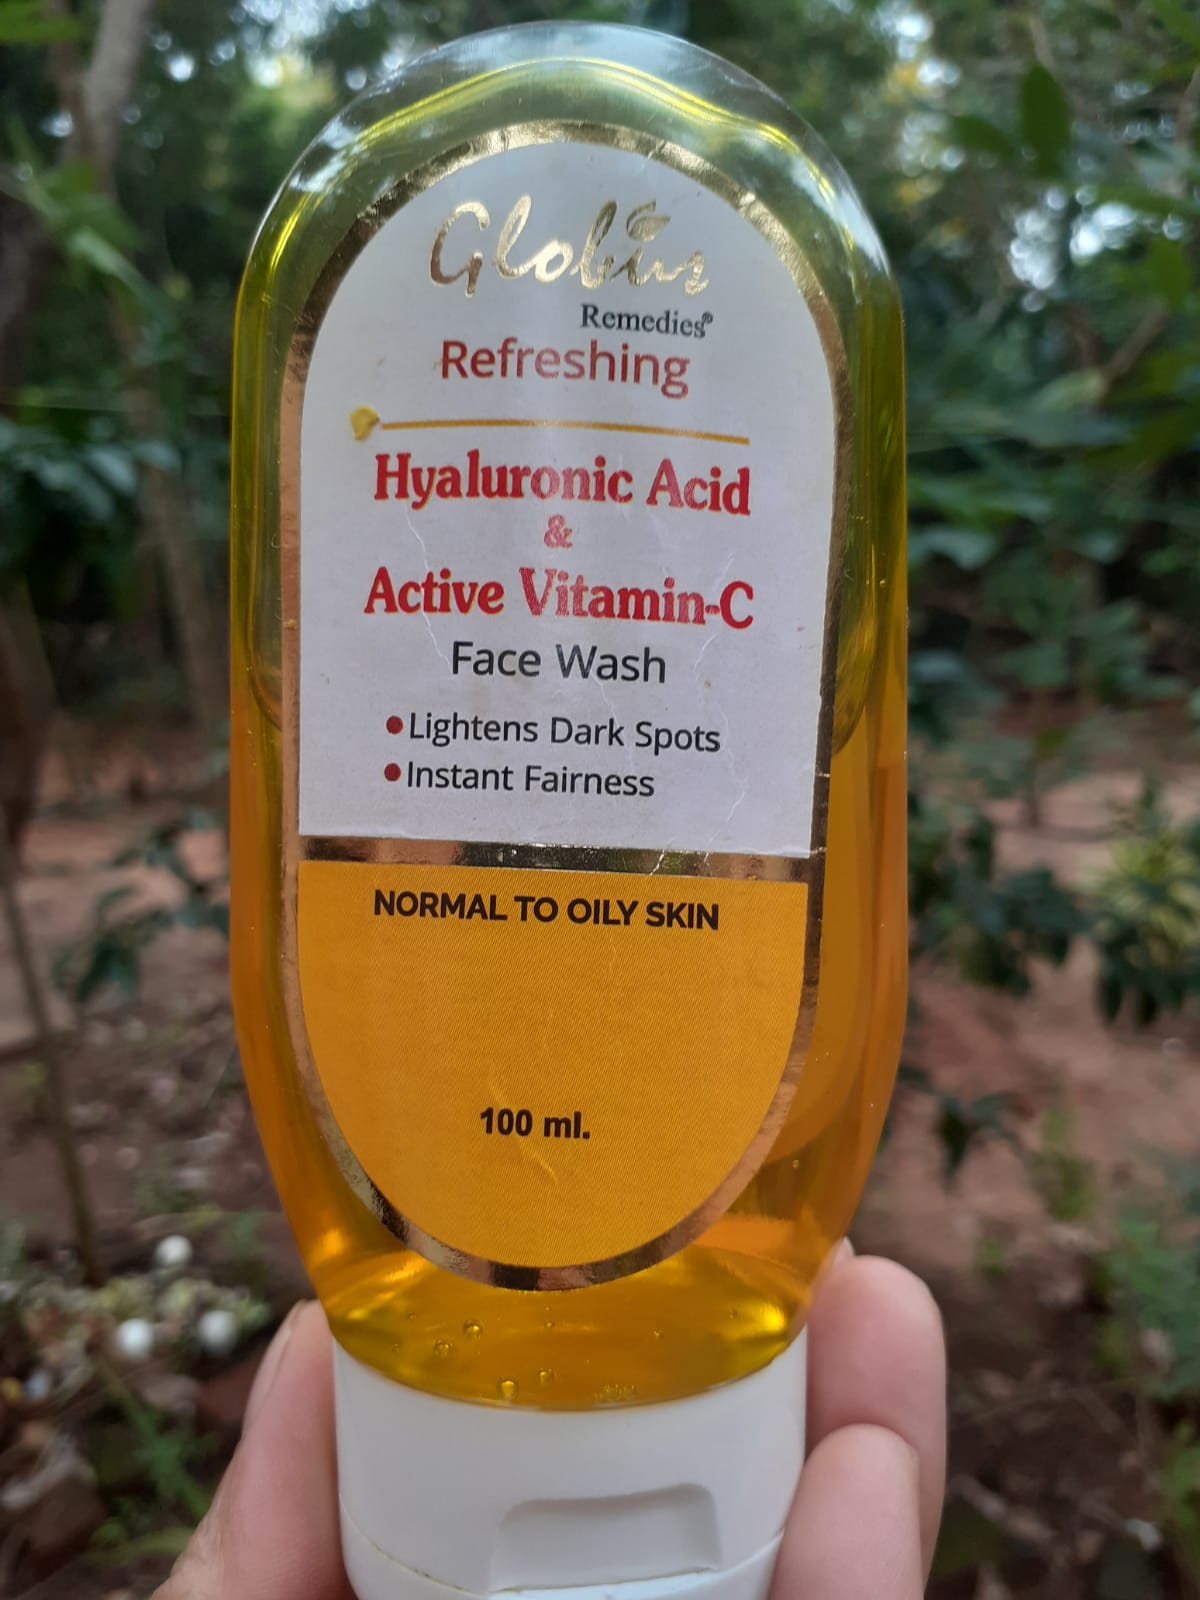 Globus Hyaluronic Acid & Active Vitamin C Face Wash Review